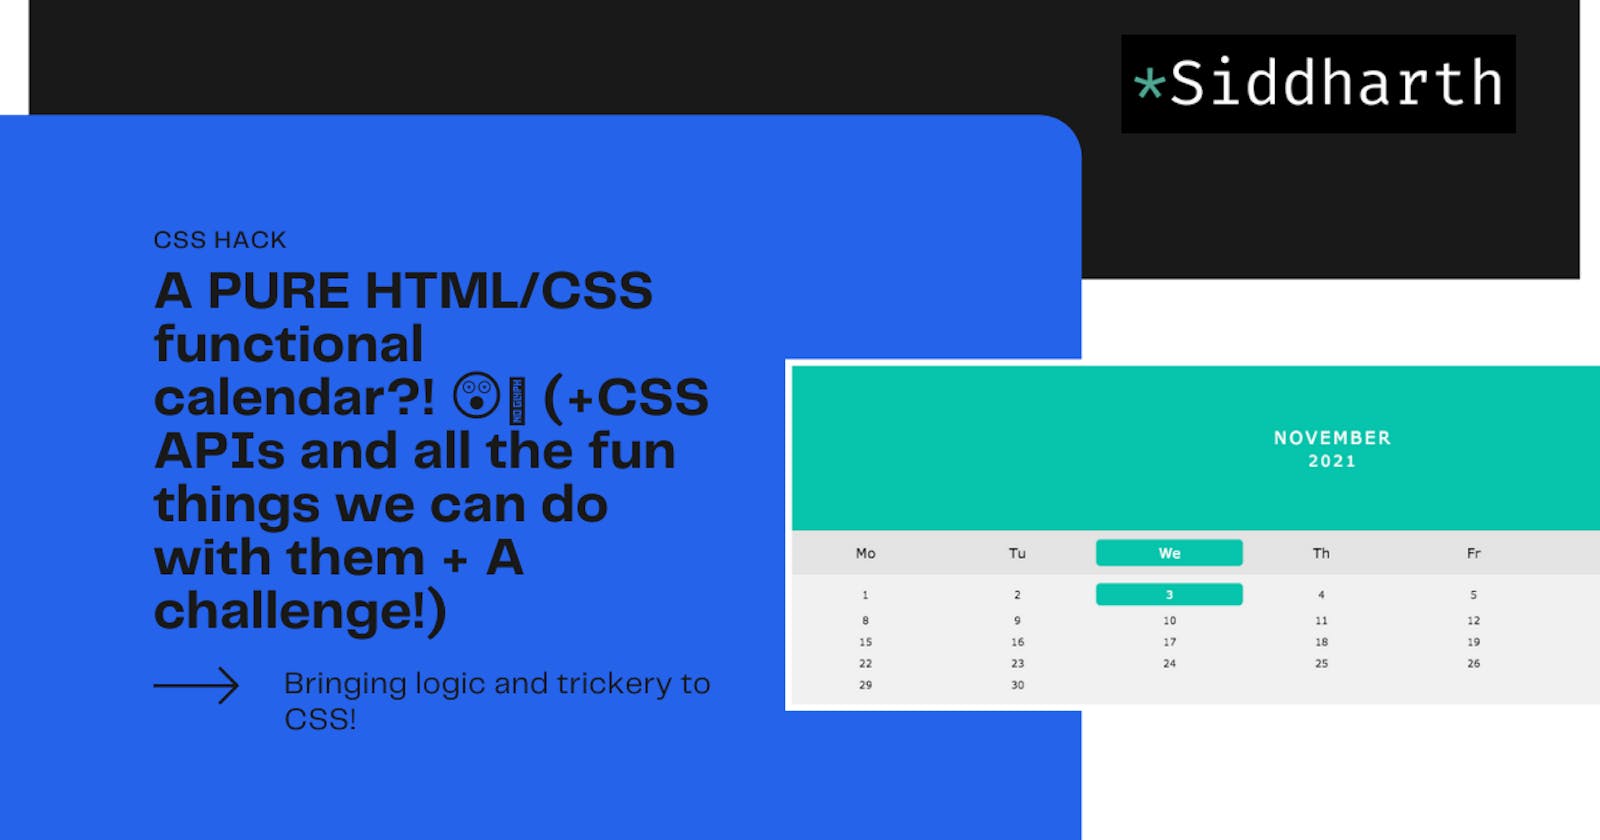 A PURE HTML/CSS functional calendar?! 😲🤯 (+CSS APIs and all the fun things we can do with them)